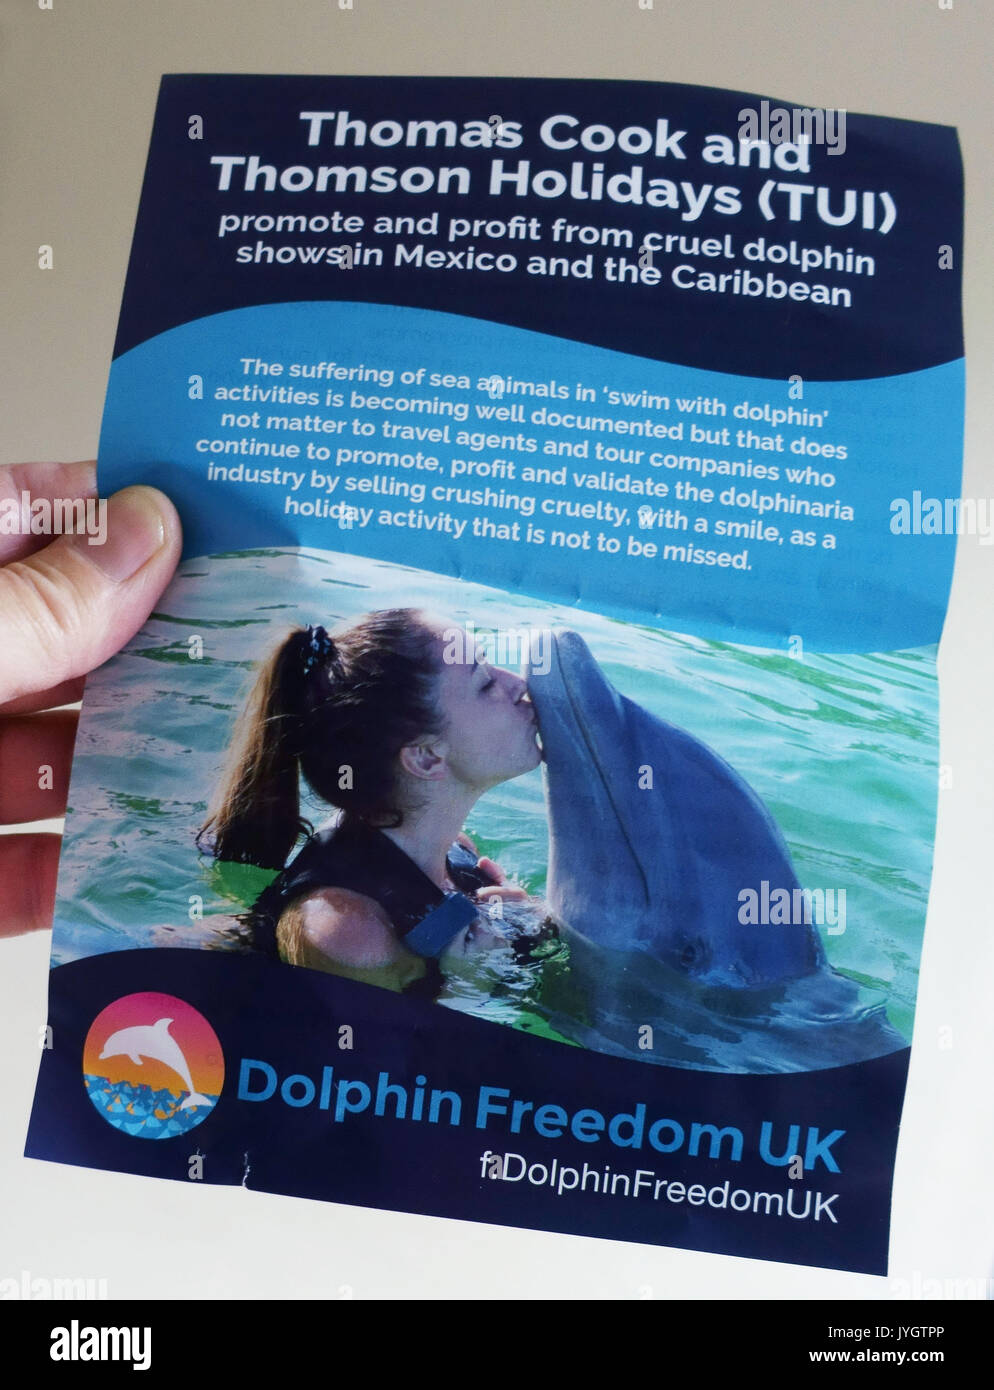 London, UK. 19th August, 2017.  Activists from Dolphin Freedom UK protest outside branch of Thomas Cook travel agents in Islington against 'cruel dolphin shows in Mexico and Caribbean'. The campaign claim that 'swim with dolphins' activities causes suffering to the sea animals. Please credit pictures by Jeffrey Blackler/Alamy Live News Stock Photo